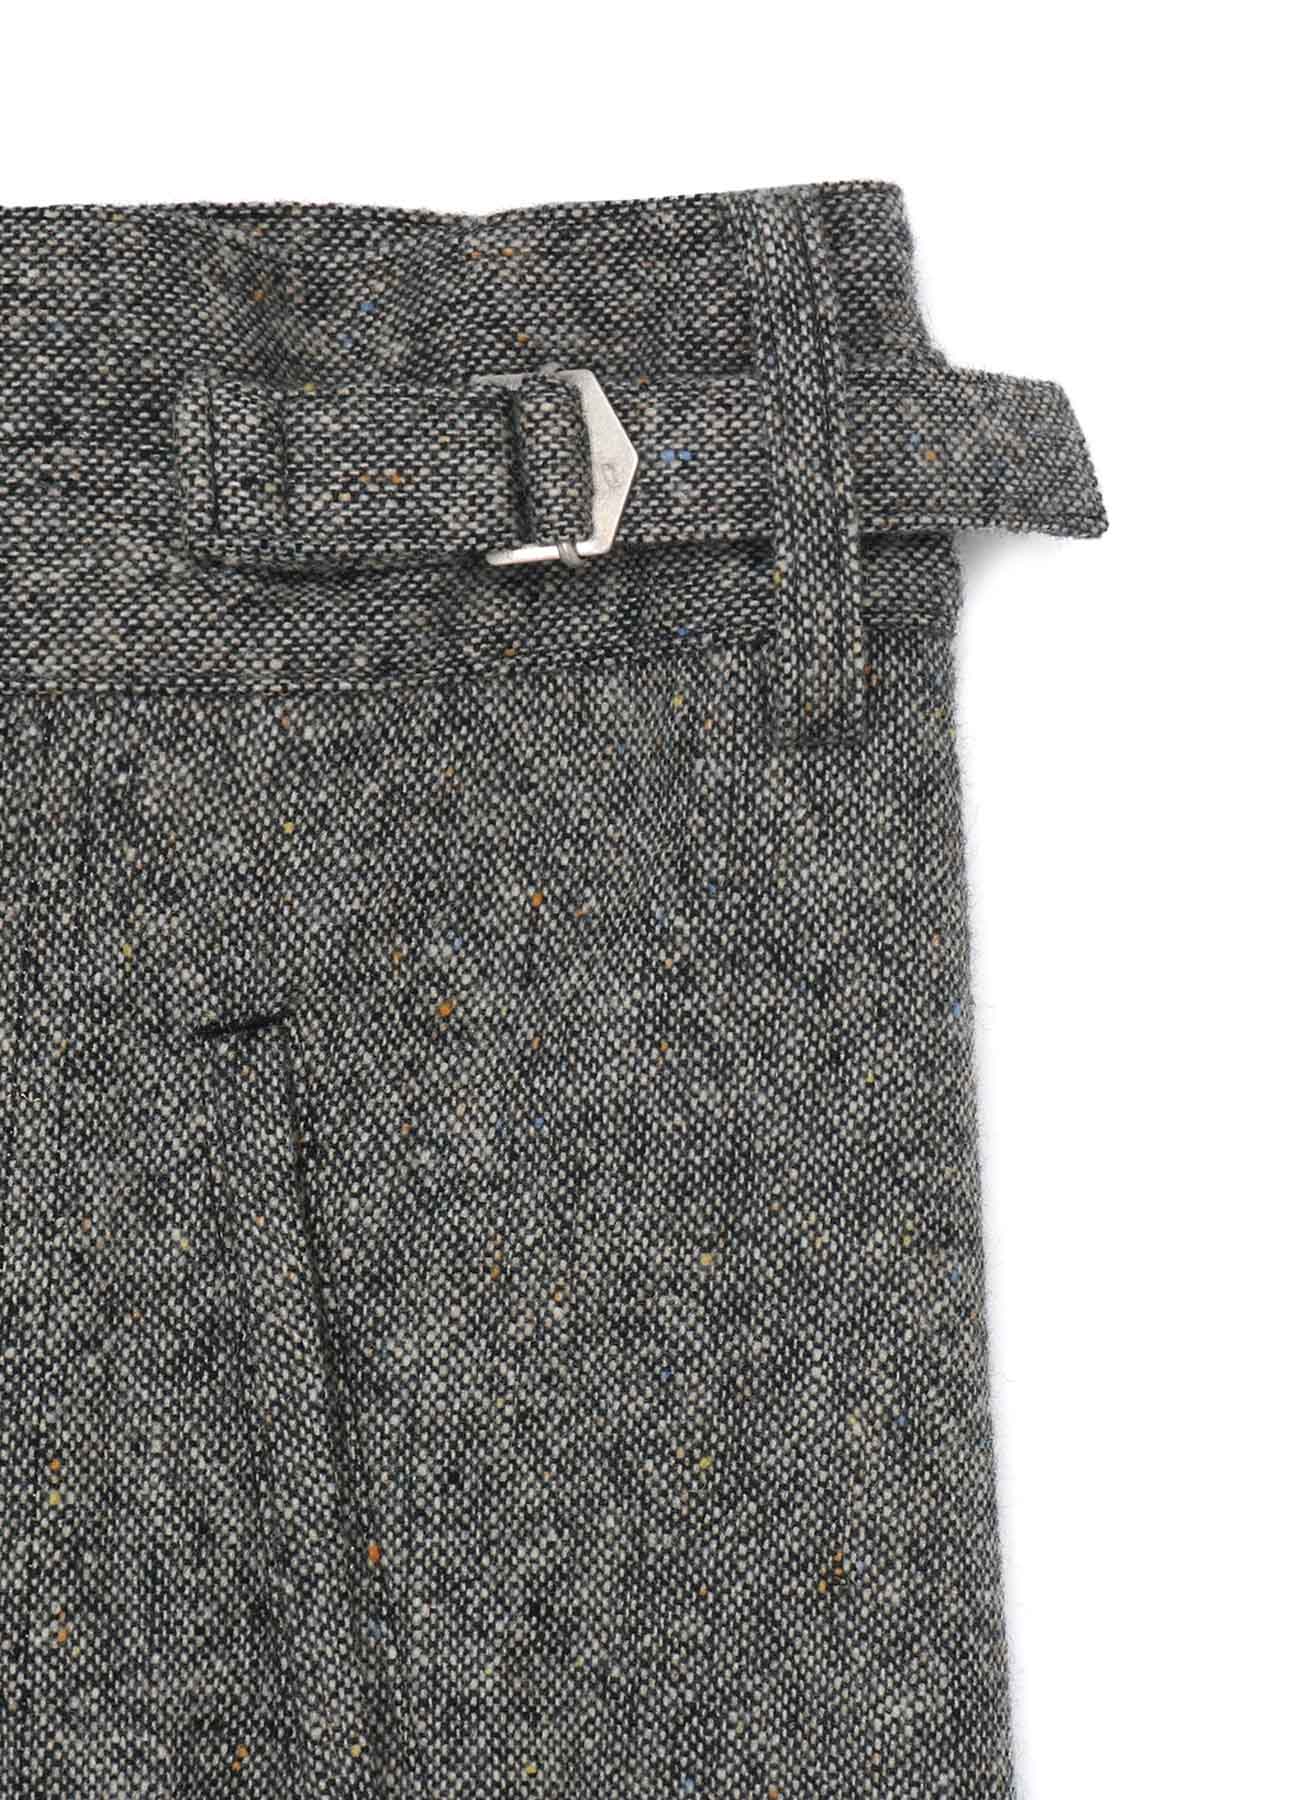 Etermine Nep Tweed+Cotton Twill Left Front Switching One-tuck Pants